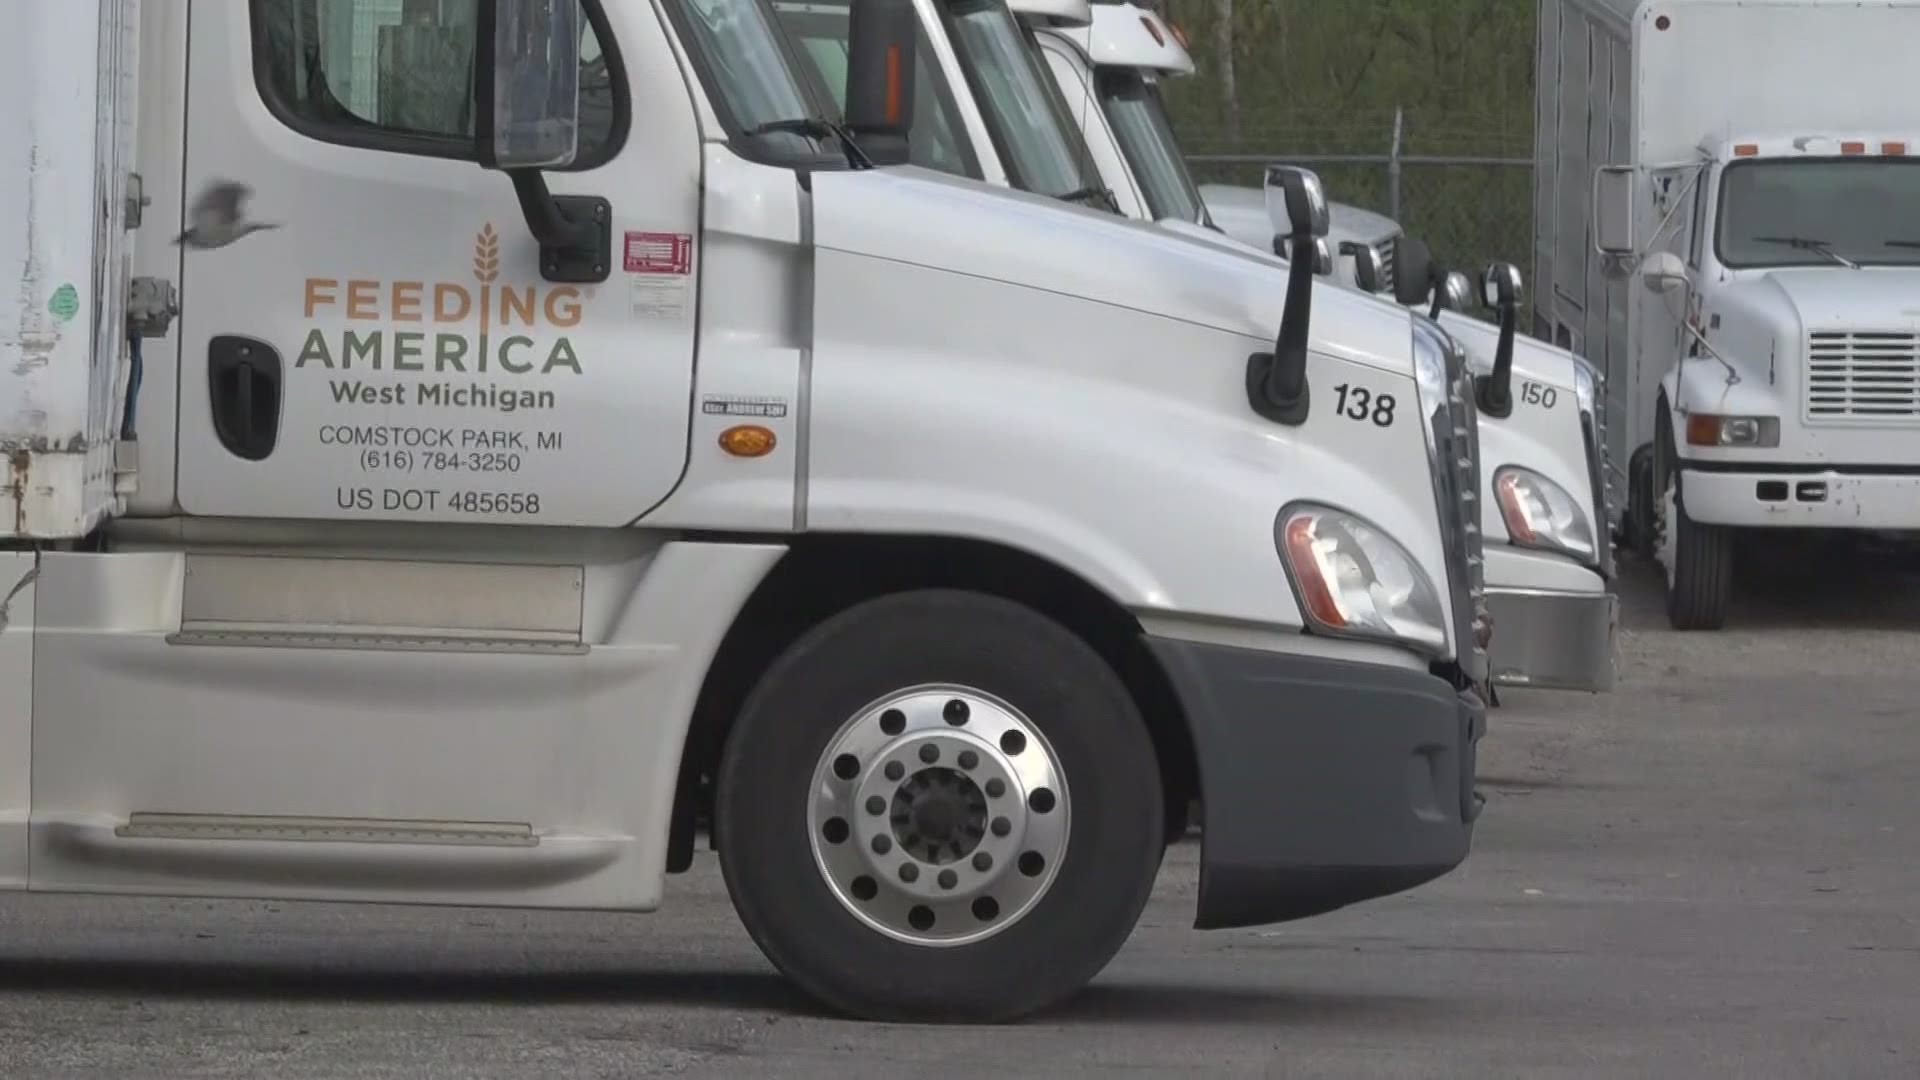 Mobile food banks saw a 64 percent rise in attendance in 2020. Donors have stepped up to meet that need, but their trucking staff has been stretched thin.